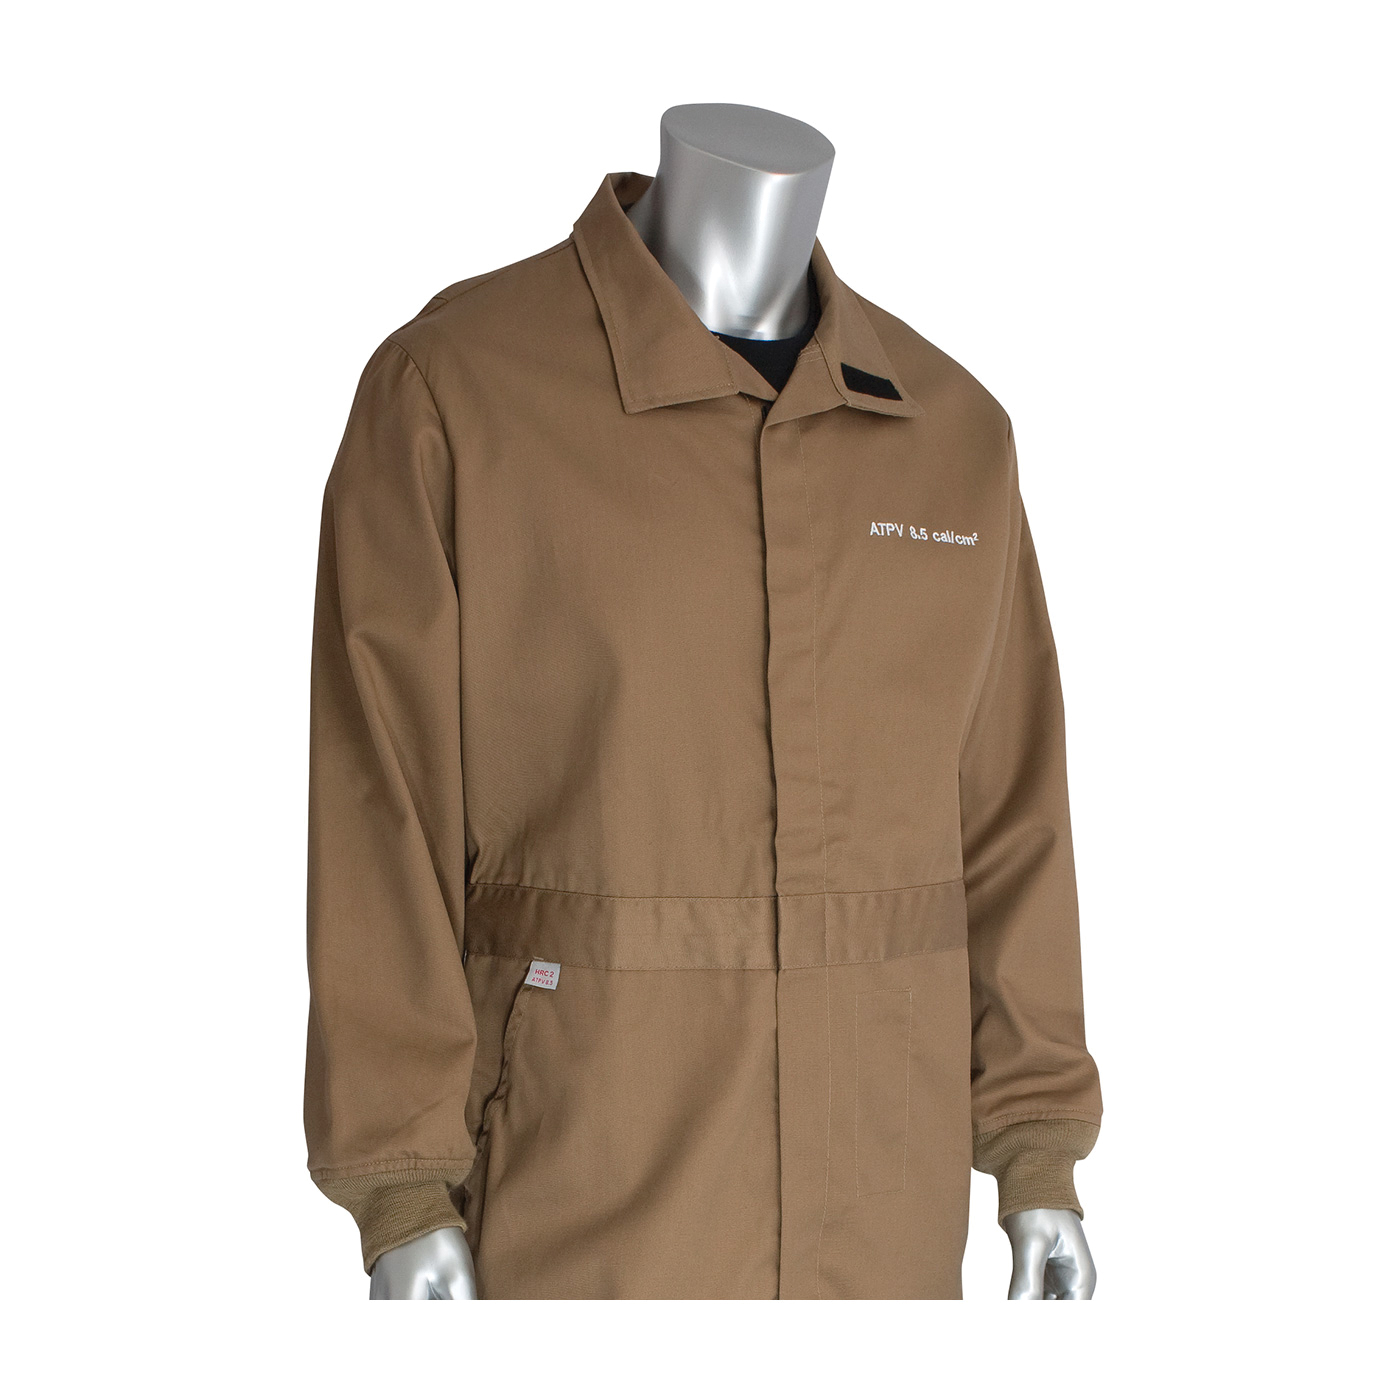 PIP® 9100-2110D/5X Flame Resistant Coverall With Insect Repellant, 5XL, Khaki, 90% Cotton/10% Nylon/FR and Bug Repellent Twill Weave, 64 to 66 in Chest, 32 in L Inseam